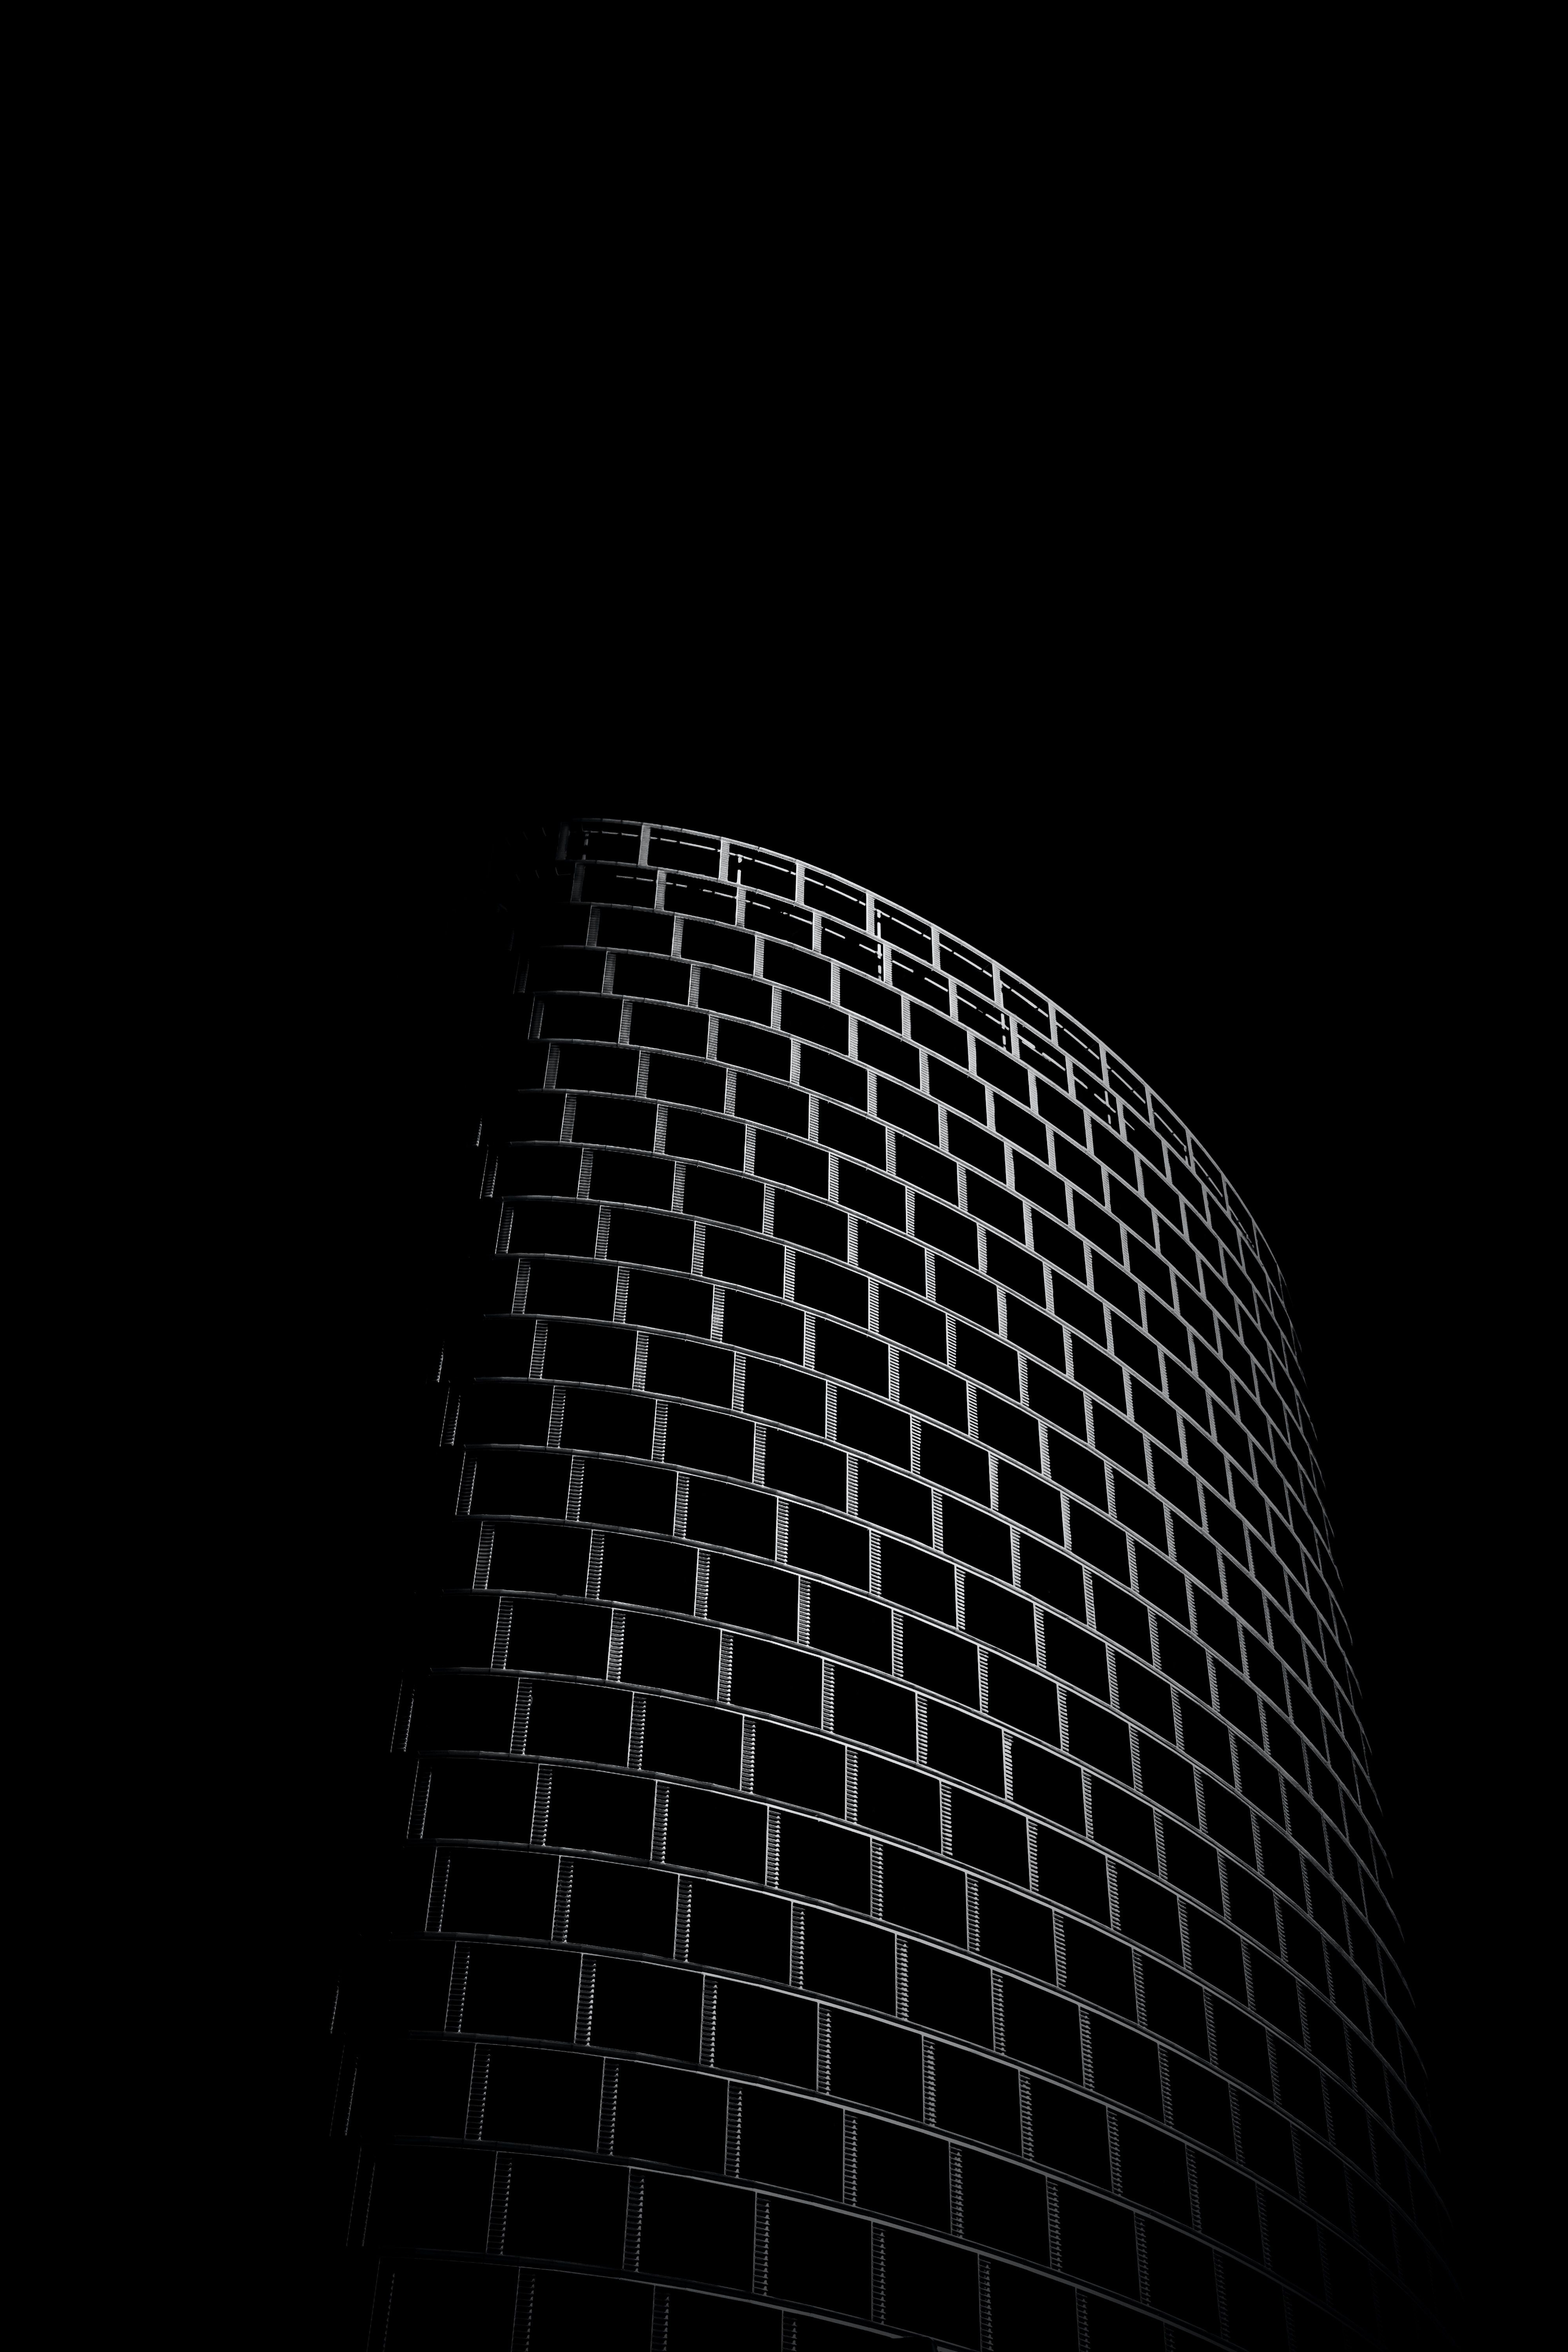 AMOLED Wallpaper [Free Download!]. best free wallpaper, black and white, black, and dark photo